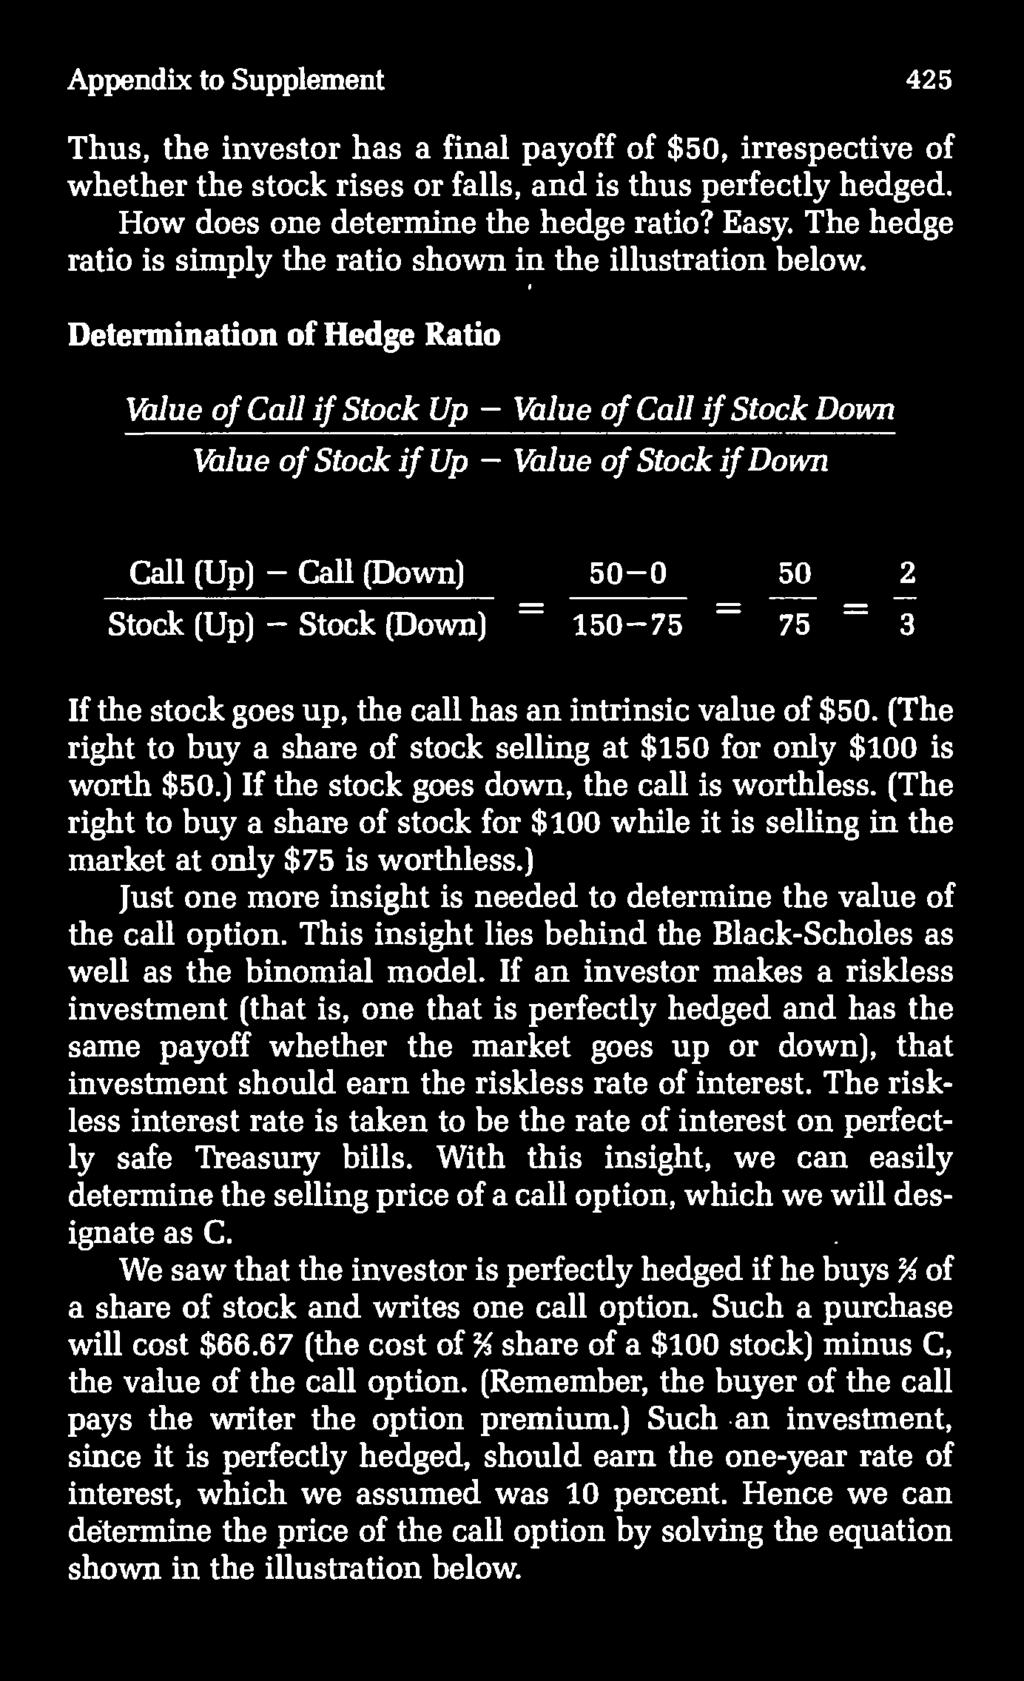 Determination of Hedge Ratio Value of Call if Stock Up - Value of Call if Stock Down Value of Stock if Up - Value of Stock if Down Call (Up) - Call (Down) 50-0 Stock (Up)- Stock (Down) - 150-75 50 2